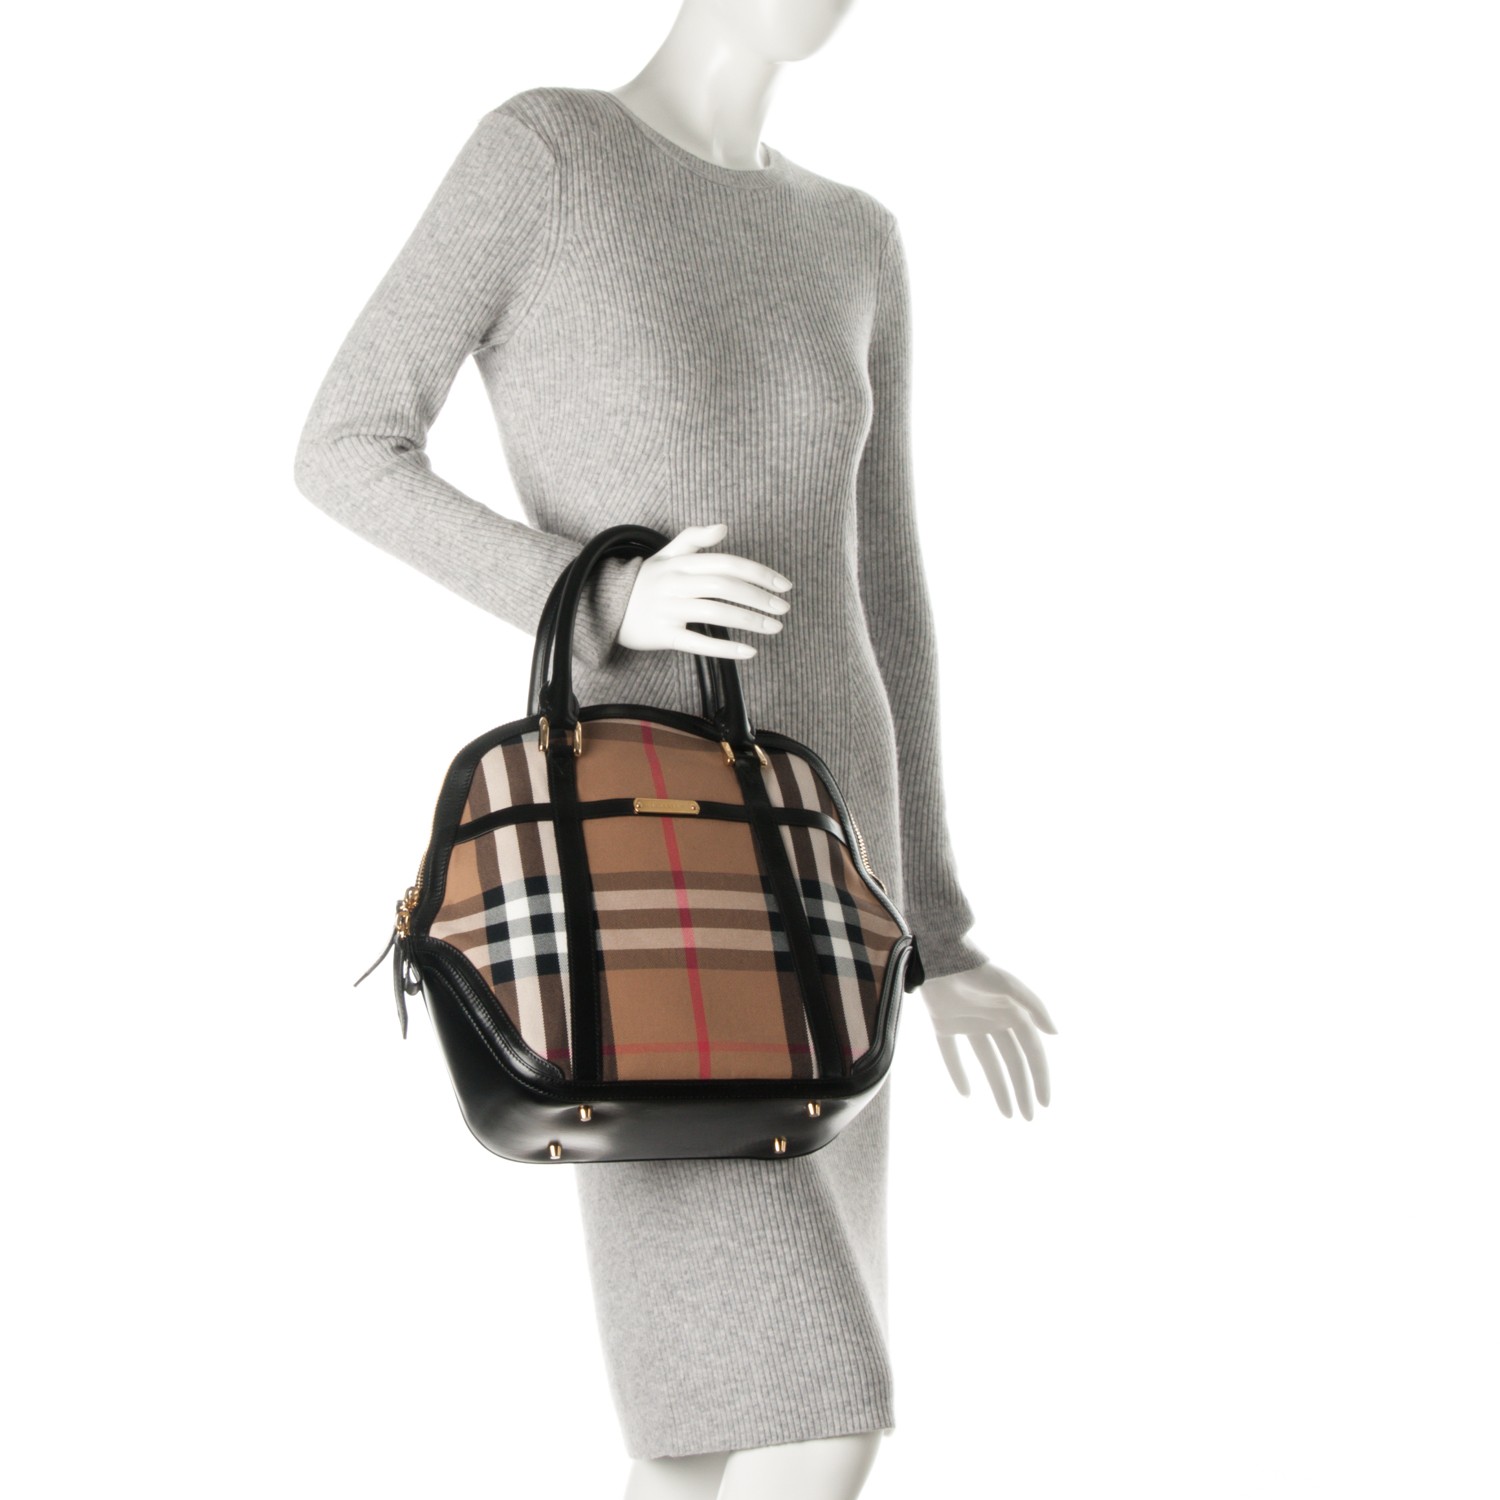 burberry orchard bowling bag